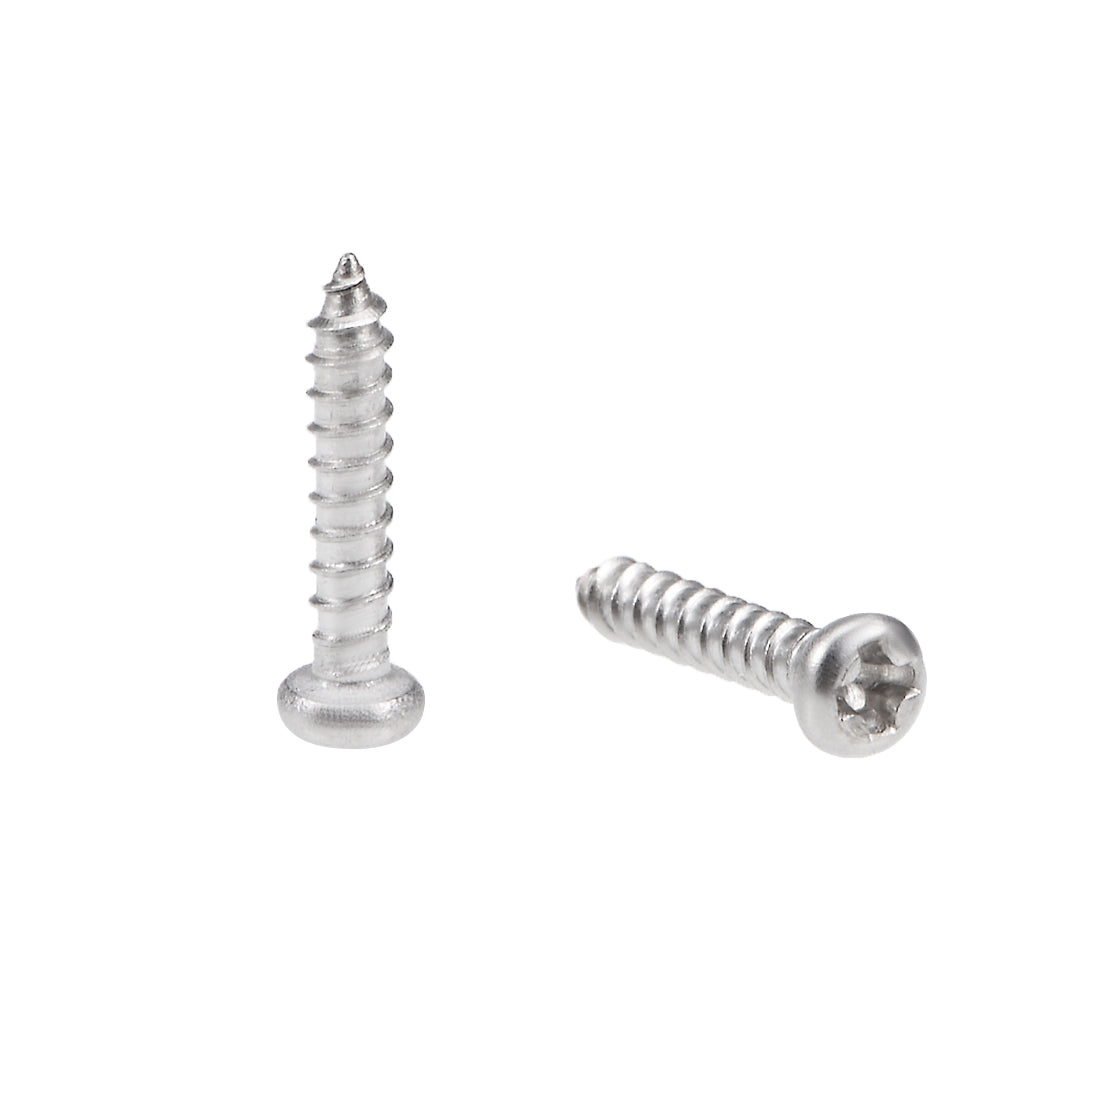 uxcell Uxcell 2x10mm Self Tapping Screws Phillips Pan Head Screw 316 Stainless Steel Fasteners Bolts 50Pcs